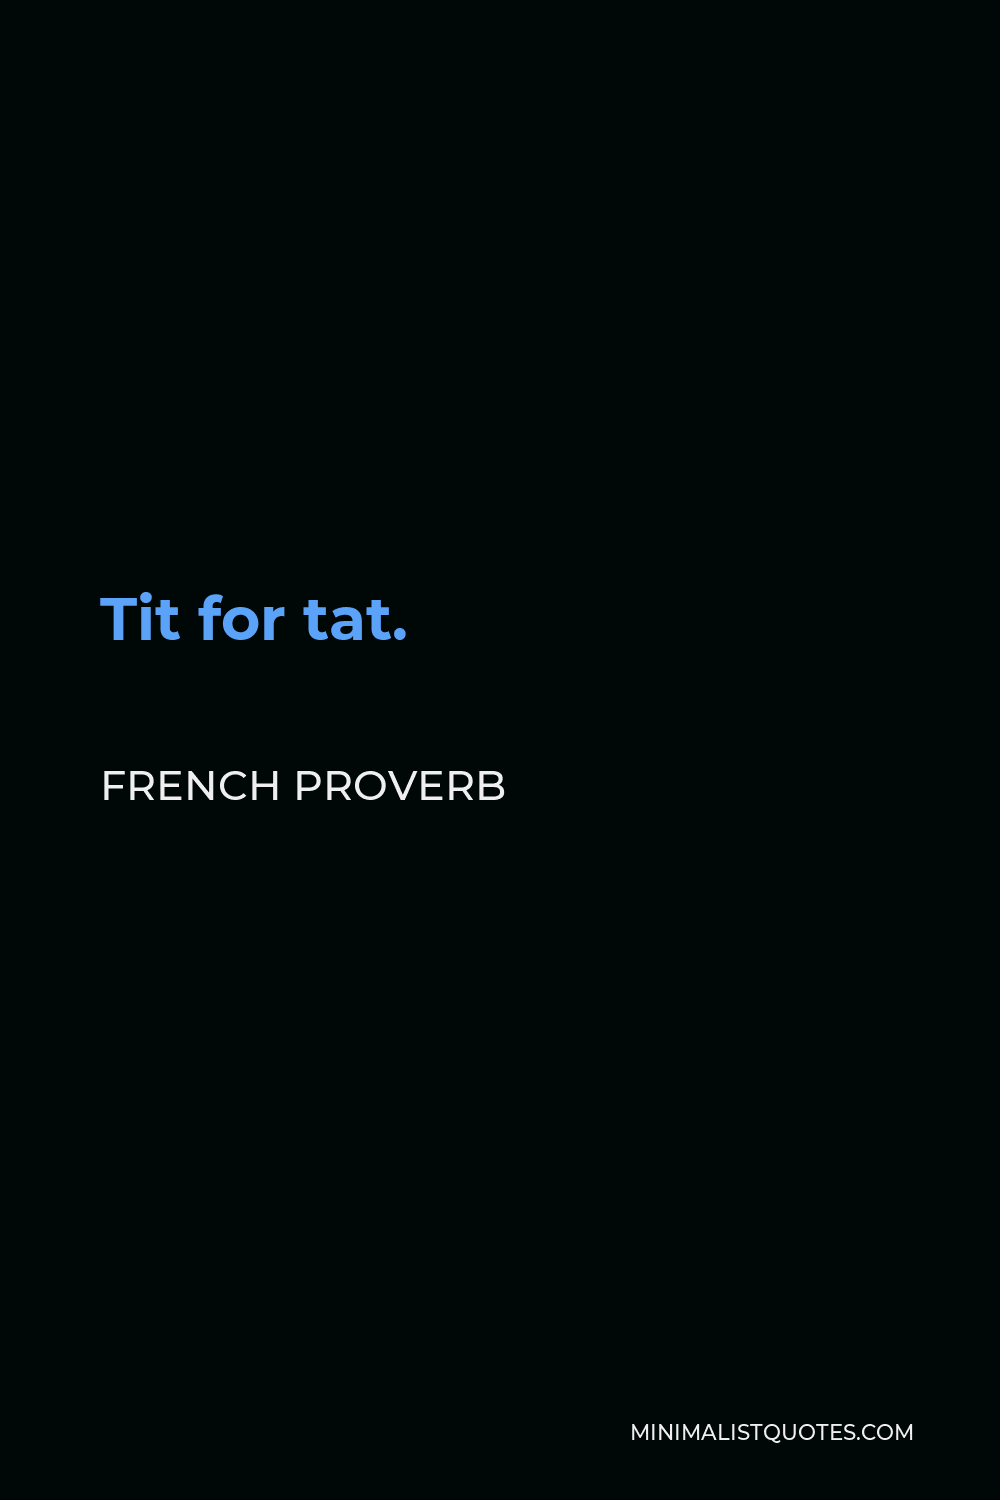 French Proverb Quote - Tit for tat.